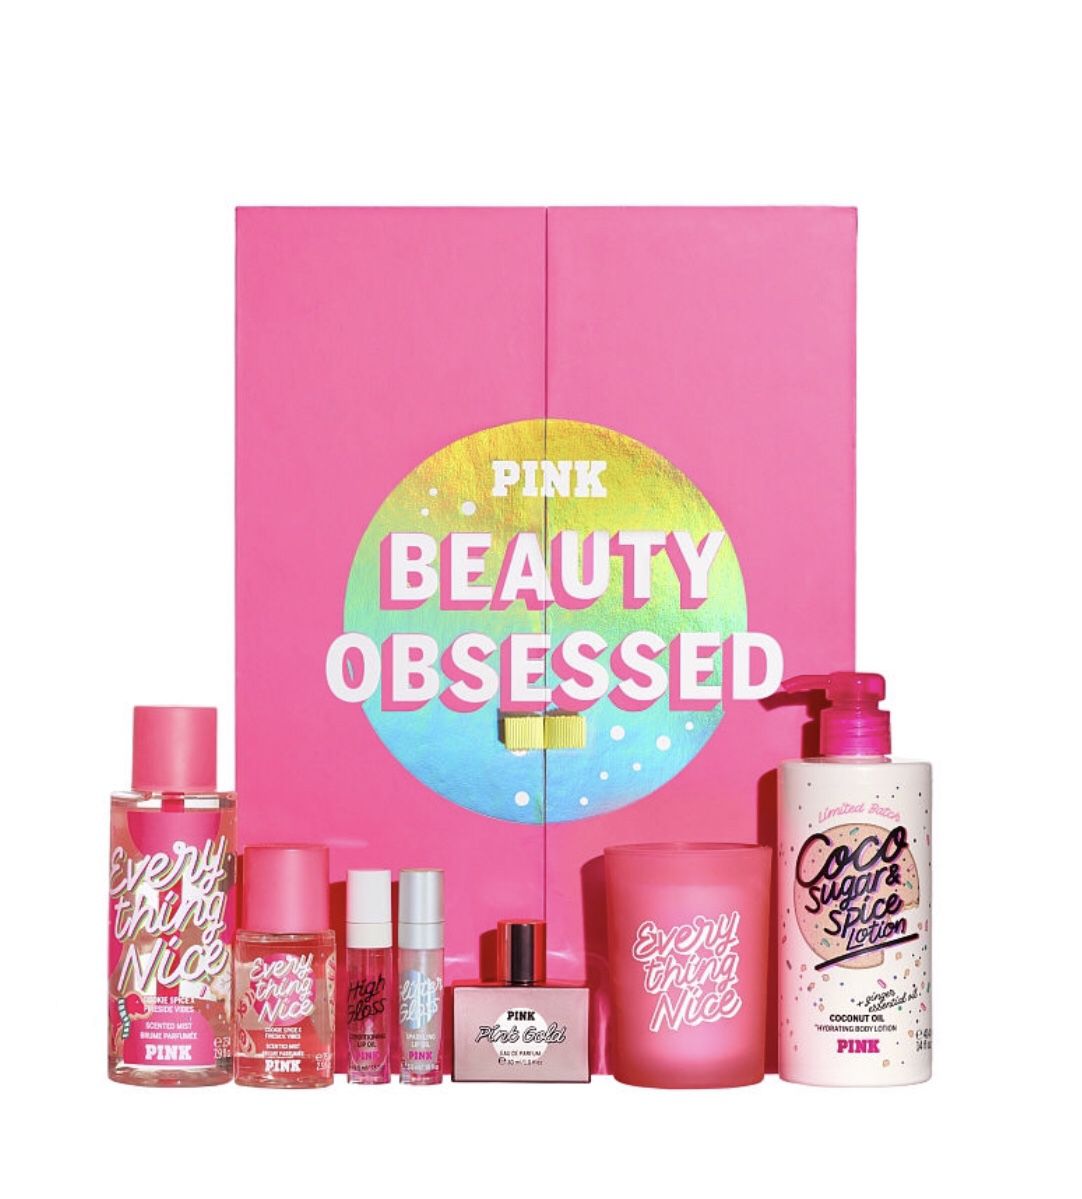 VS PINK beauty obsessed gift box NEW